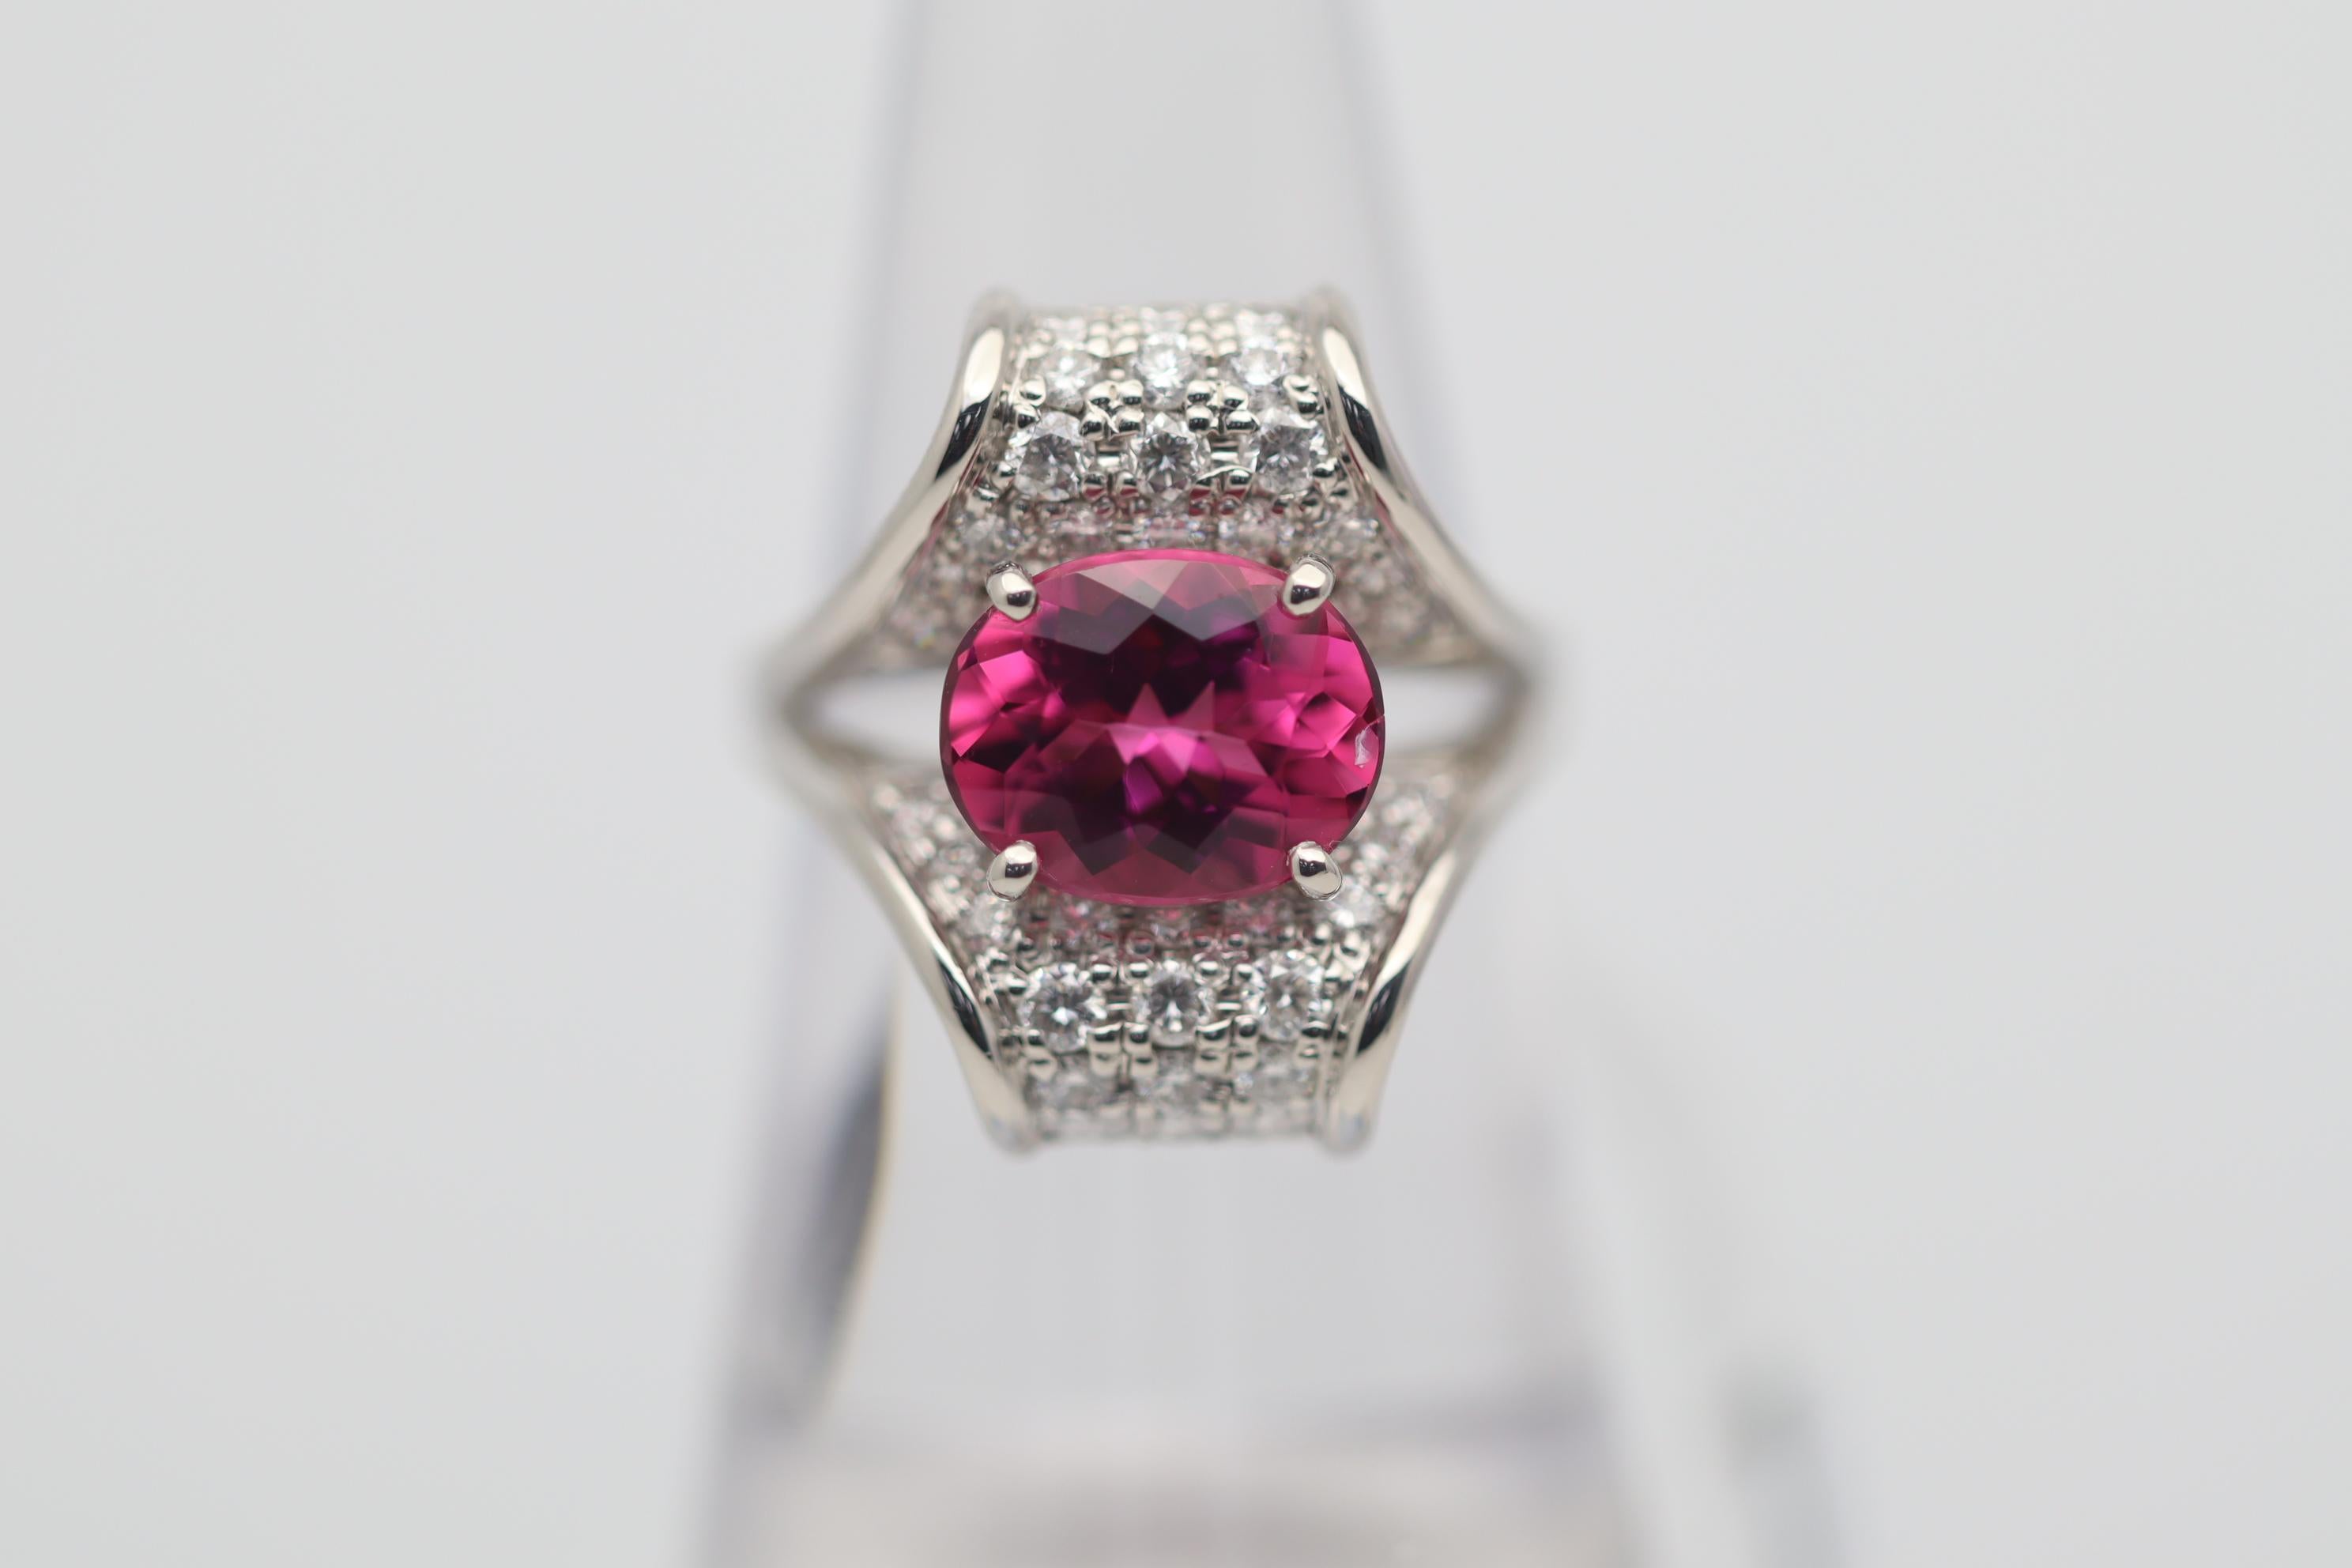 A sweet and juicy rubellite tourmaline takes center stage! It has a bright vivid pink-red color and weighs 2.49 carats. It is complemented by 0.96 carats of round brilliant-cut diamonds adding extra sparkle and brilliance to the ring.